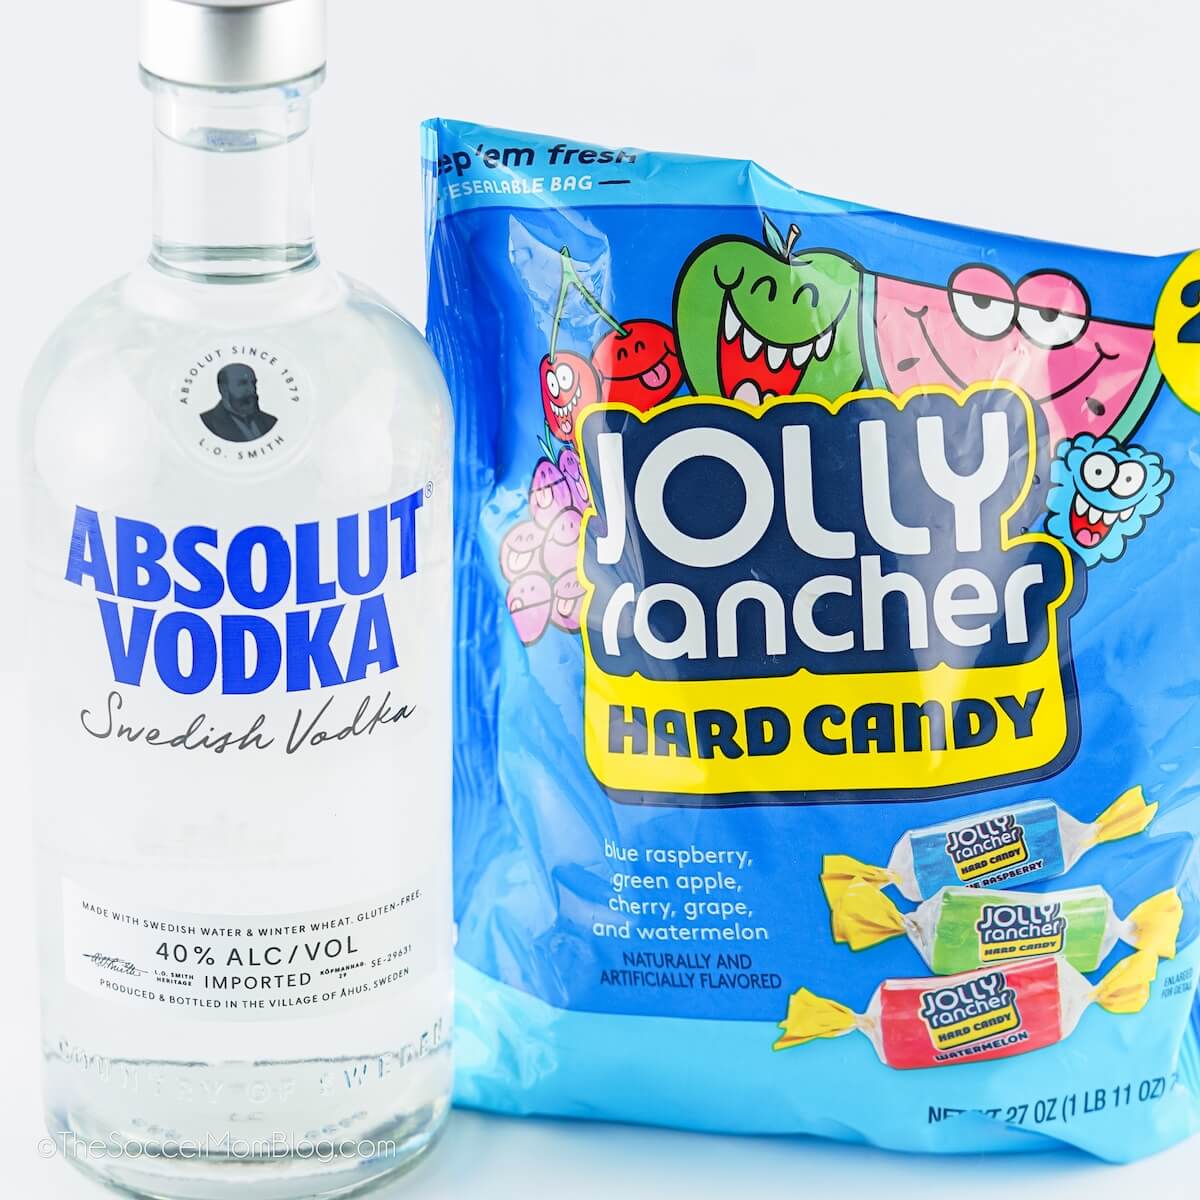 Jolly Rancher Moonshine ingredients: vodka and Jolly Ranchers